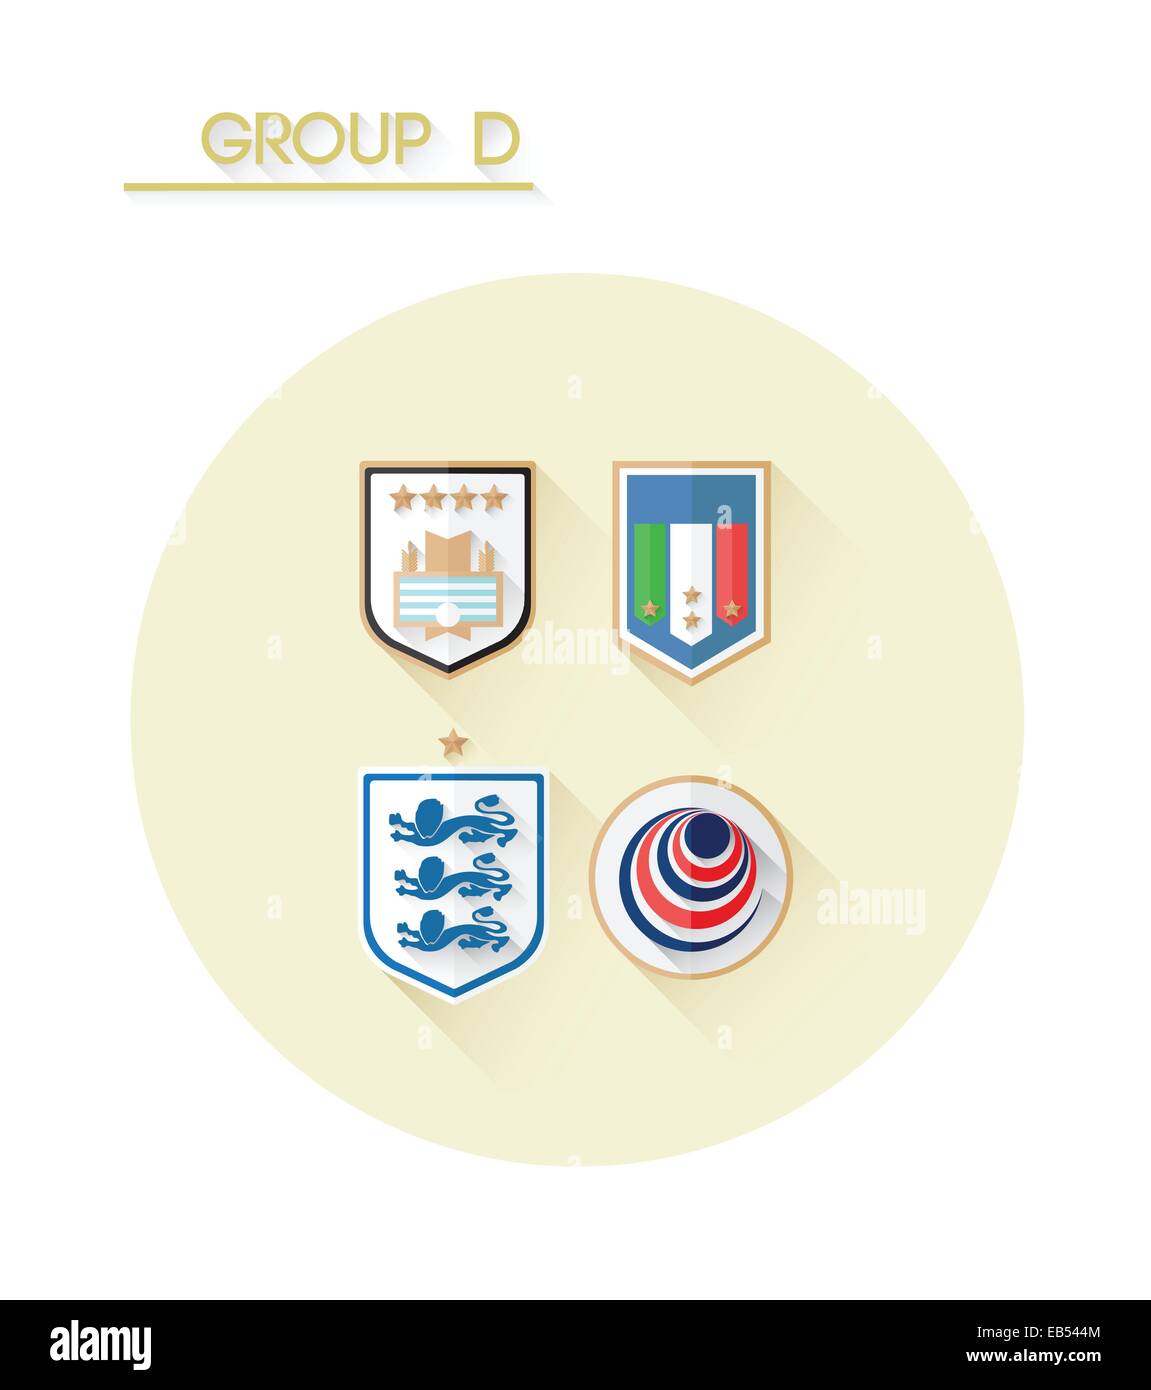 Group d with country crests Stock Vector